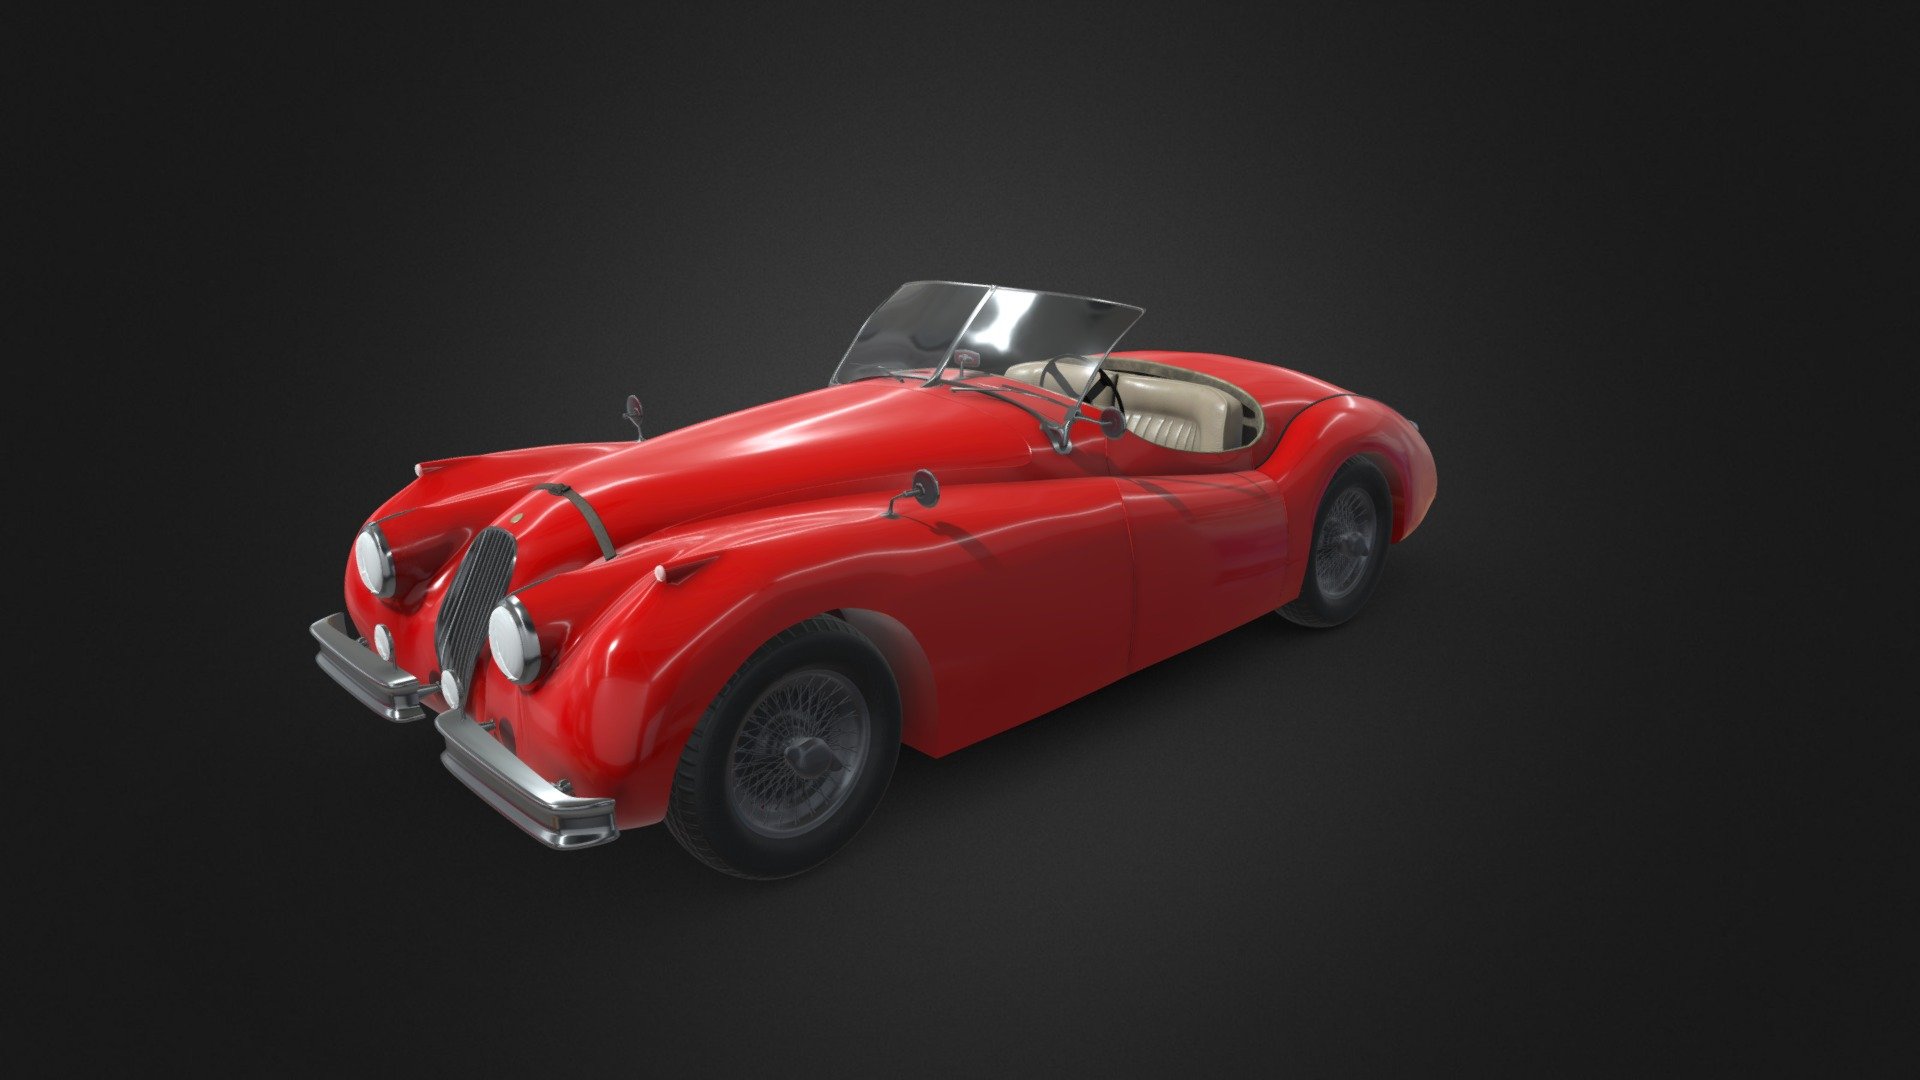 The Jaguar XK120 is a roadster sports car manufactured by Jaguar between 1948 and 1954. It was Jaguar's first sports car since SS 100 production ended in 1939.

The XK120 is a highly desirable model. In 2016, Bonhams sold a matching numbers left-hand-drive alloy-bodied roadster - one of only 184 - for $396,000 (£302,566). This marks the highest price achieved for an XK120 at auction so far 3d model